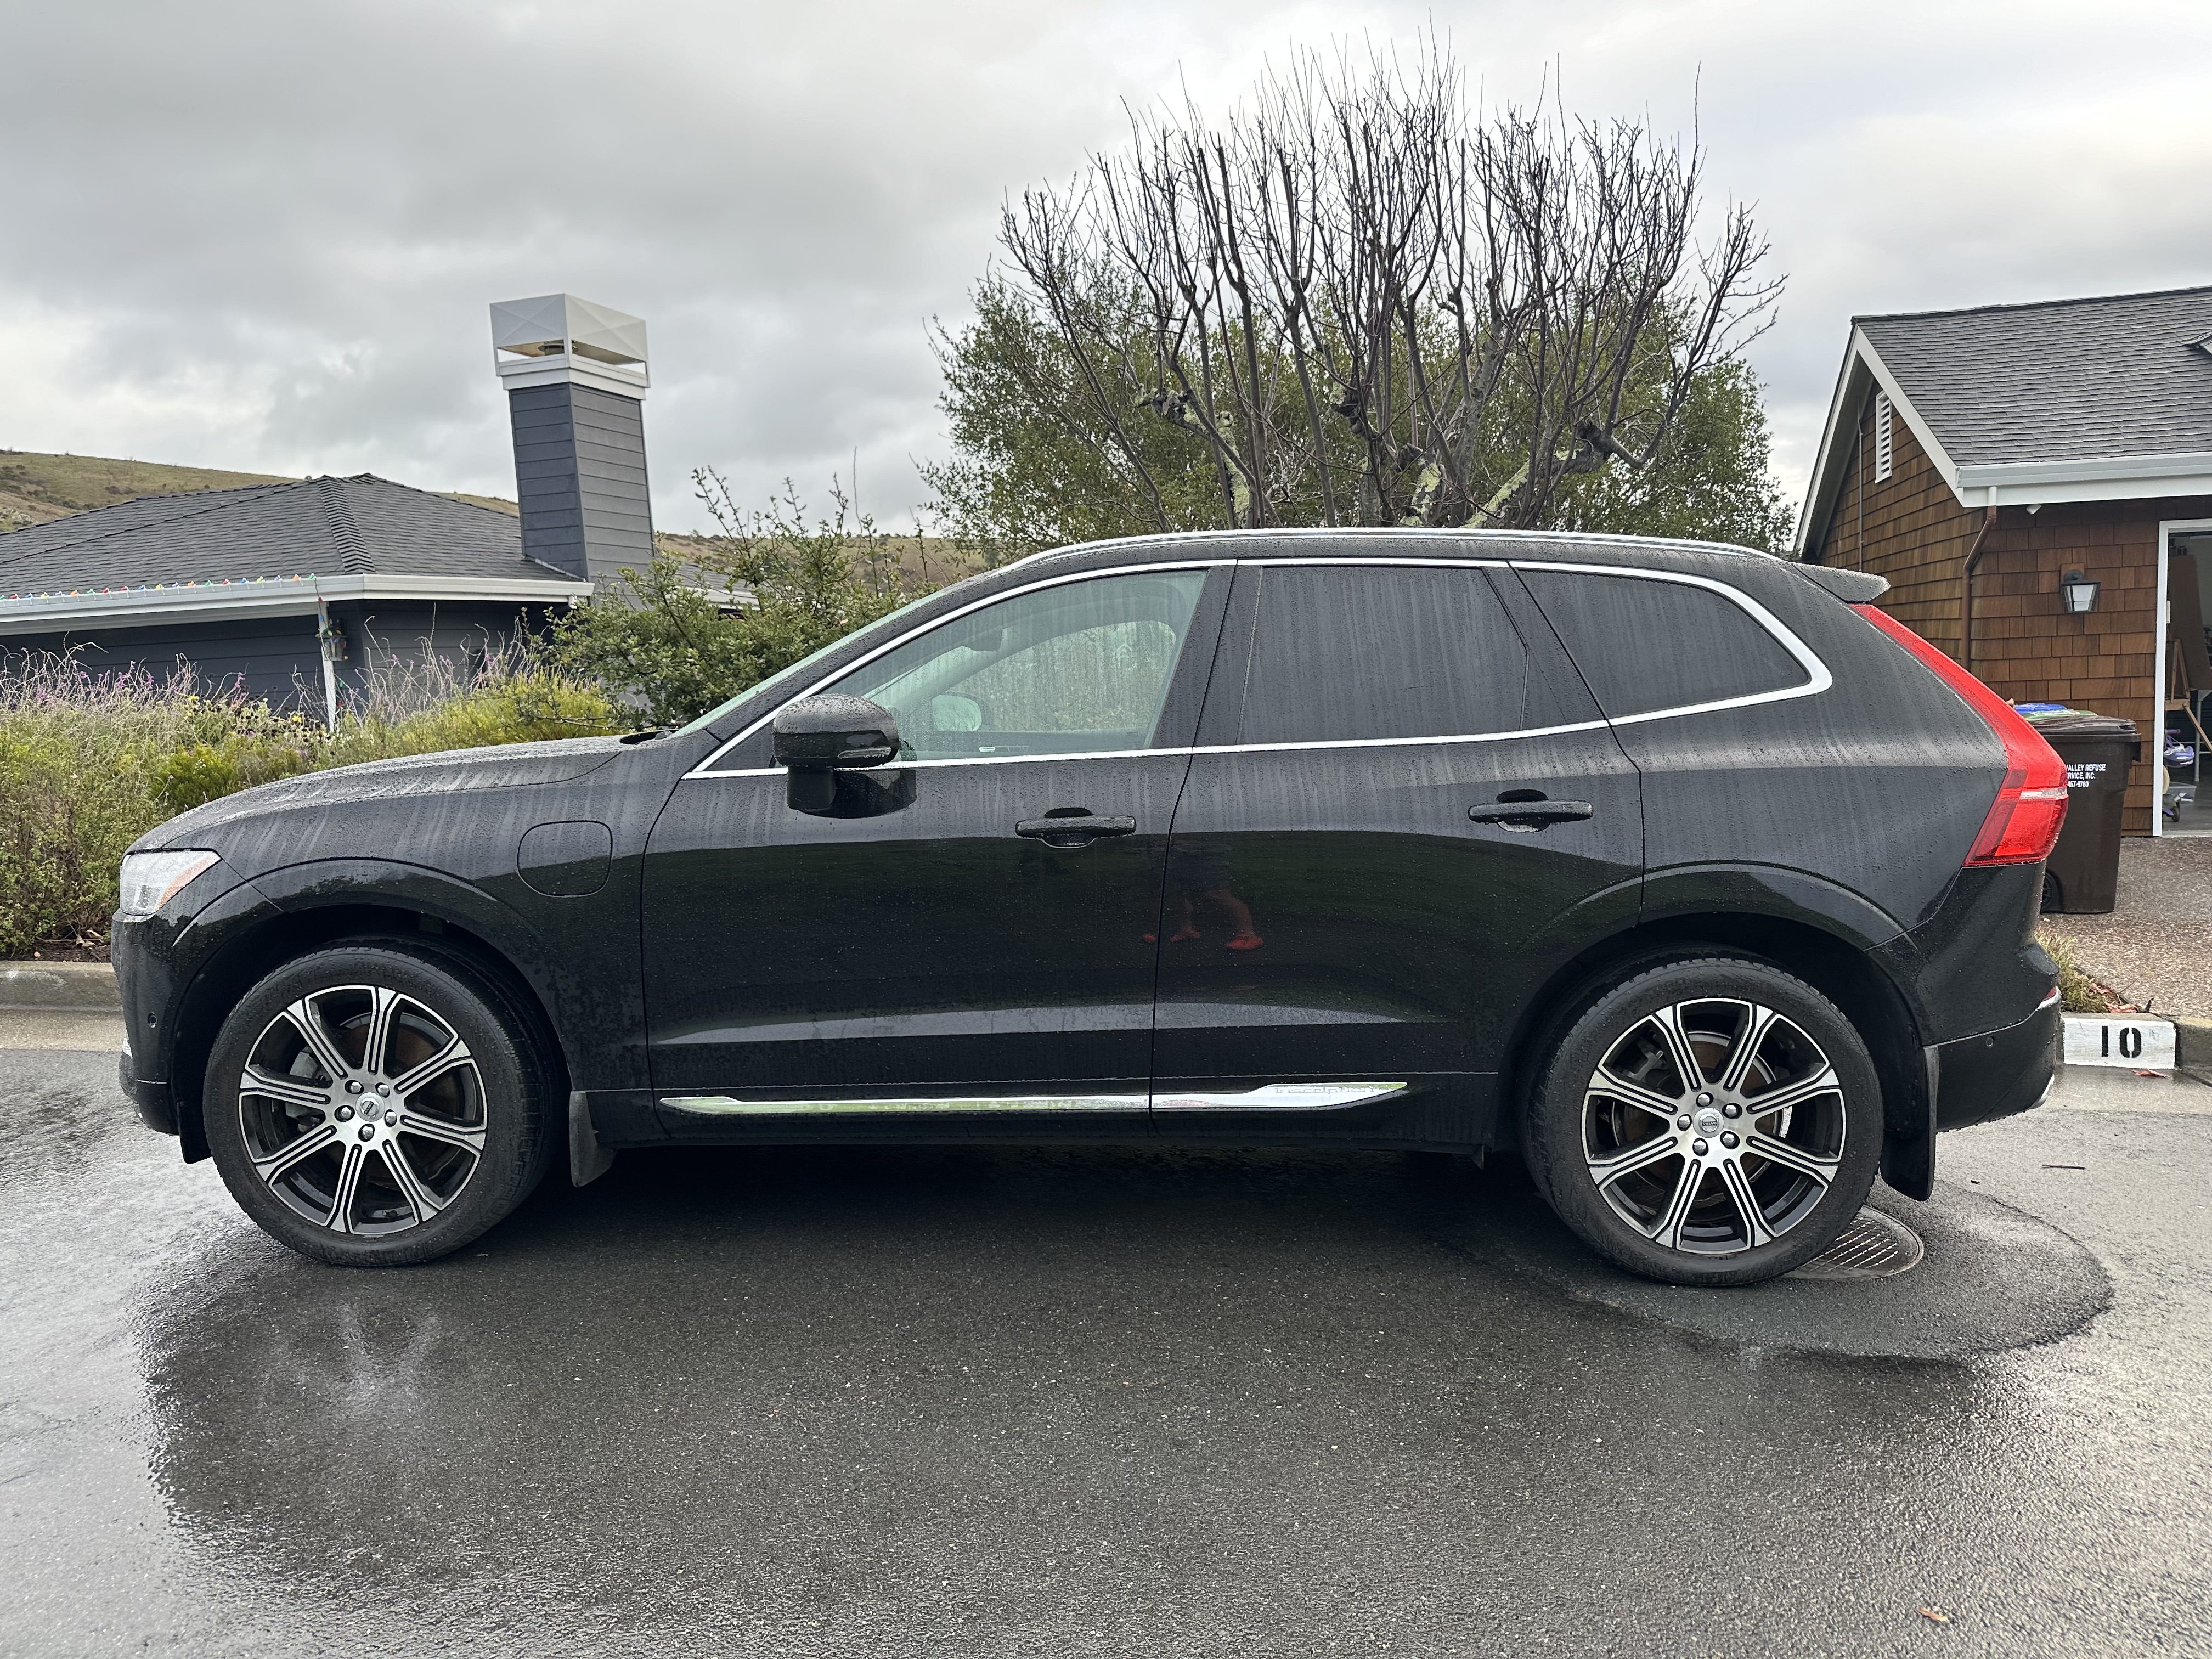 Used 2018 Volvo XC60 Hybrid for Sale Right Now - Autotrader